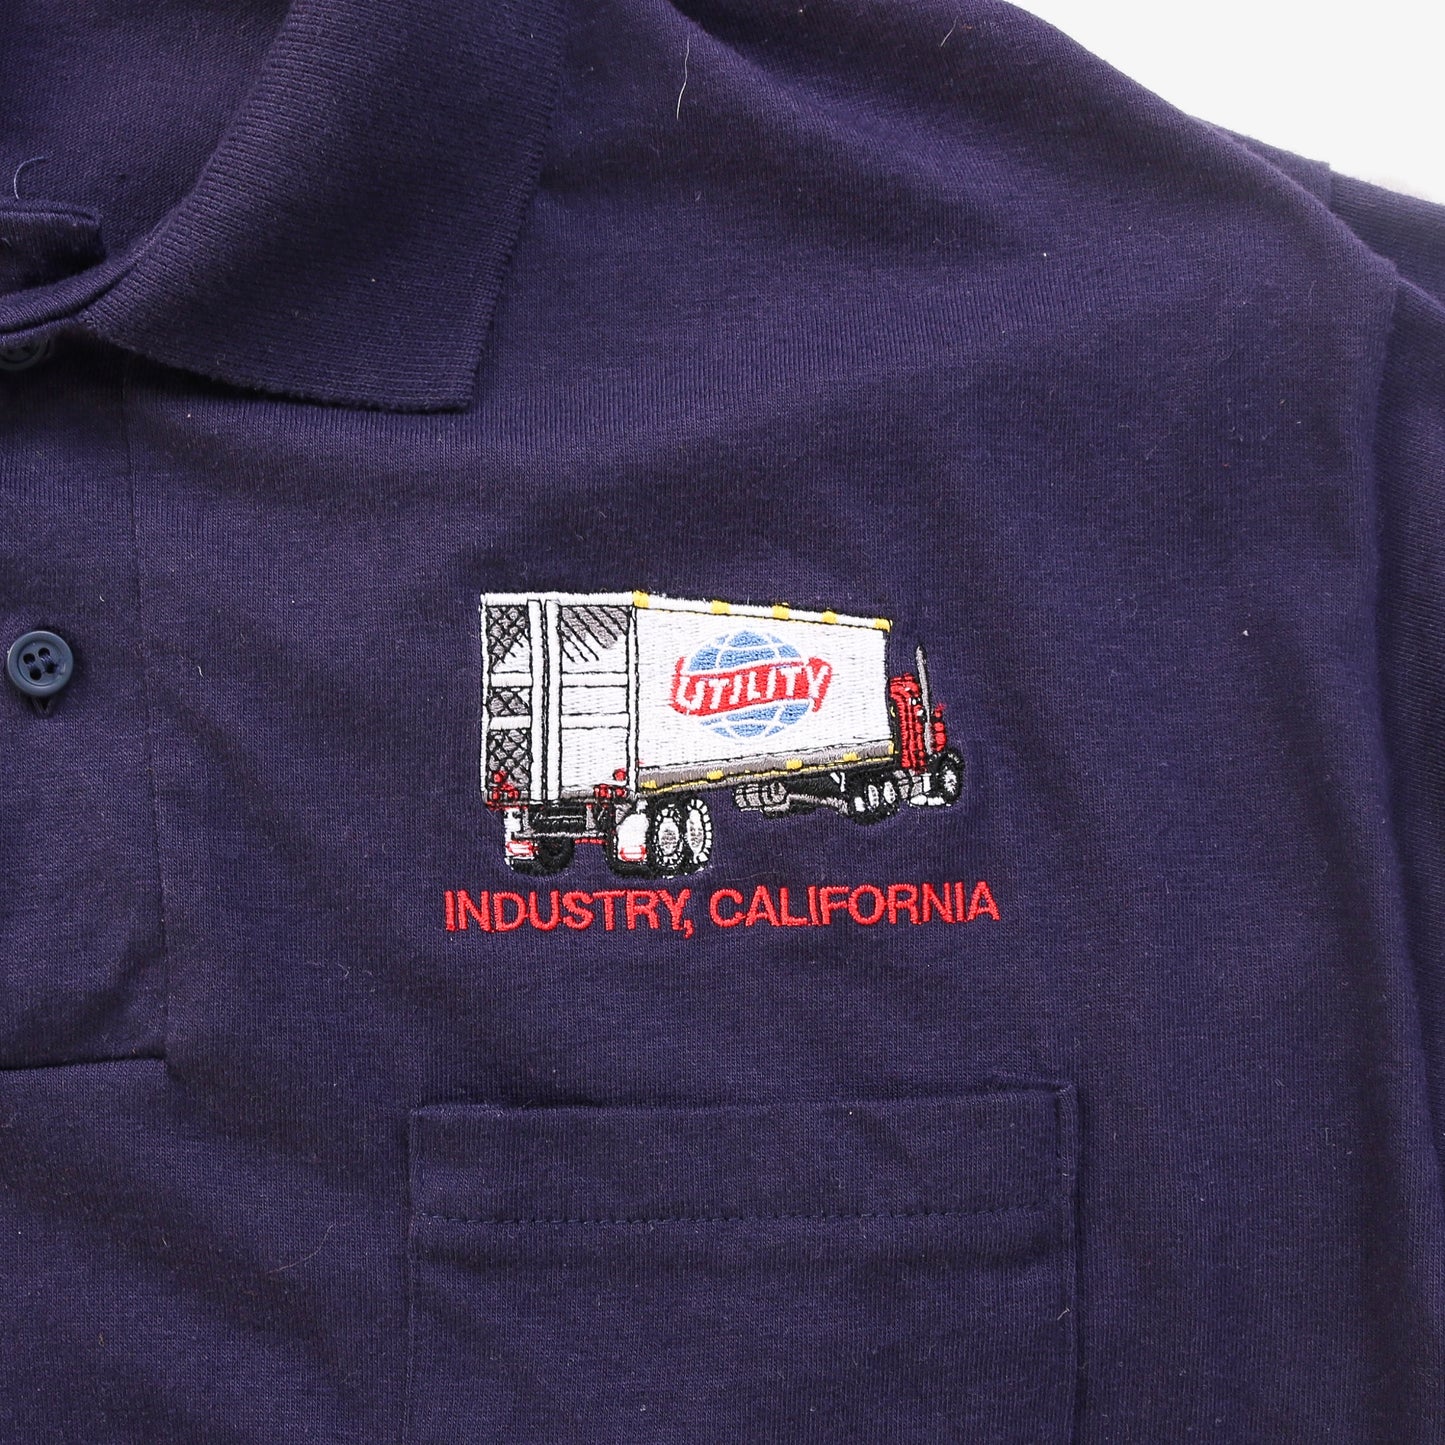 Vintage "Industry California" T-Shirt - American Madness